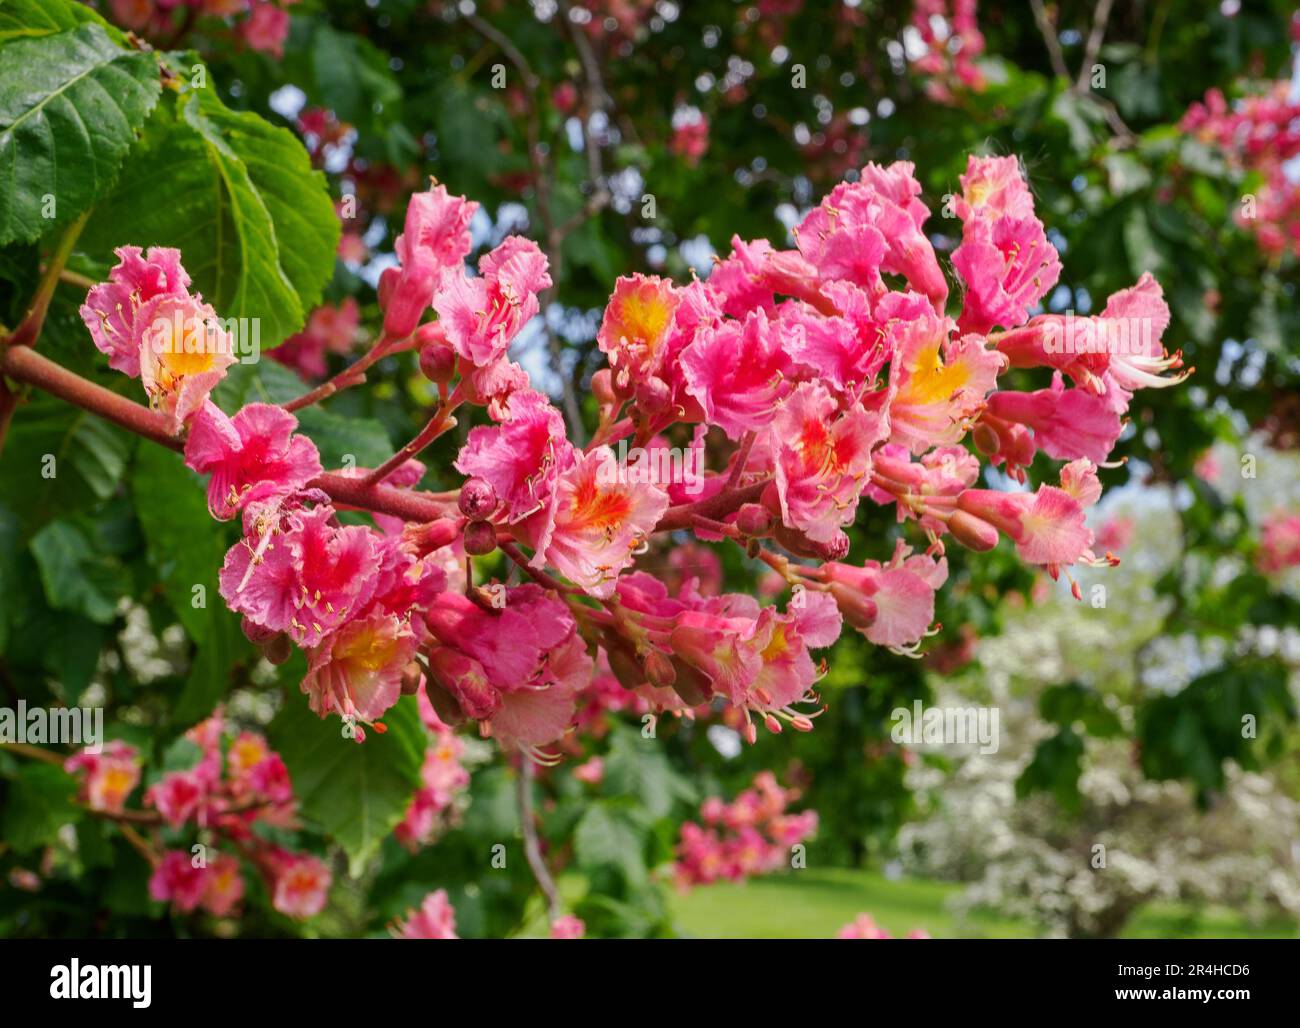 Flowers of the Red Horse Chestnut Aesculus hippocastrum x carnea an ornamental tree grown in parks and gardens - Somerset UK Stock Photo